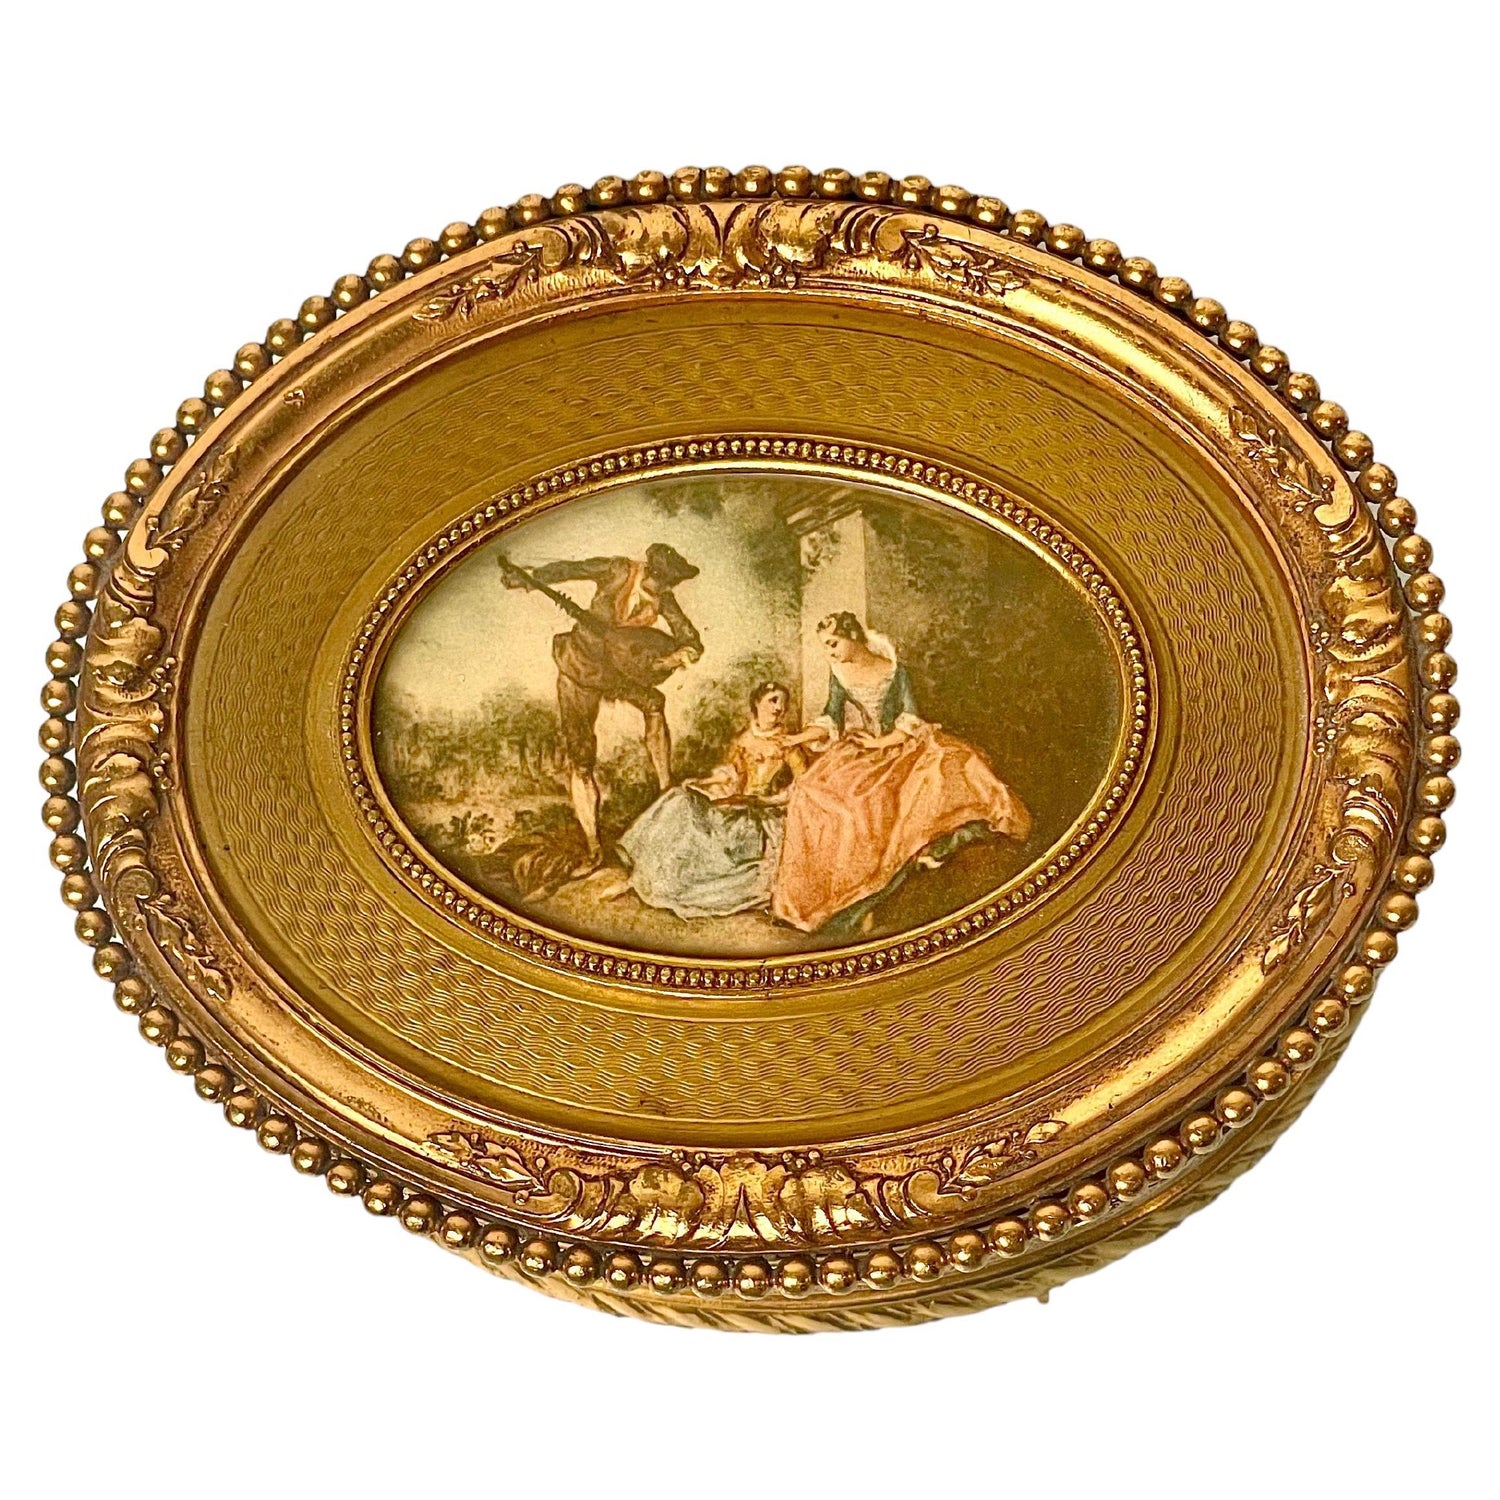 A Louis XVI Style Sèvres Style Porcelain Mounted Jewellery Box